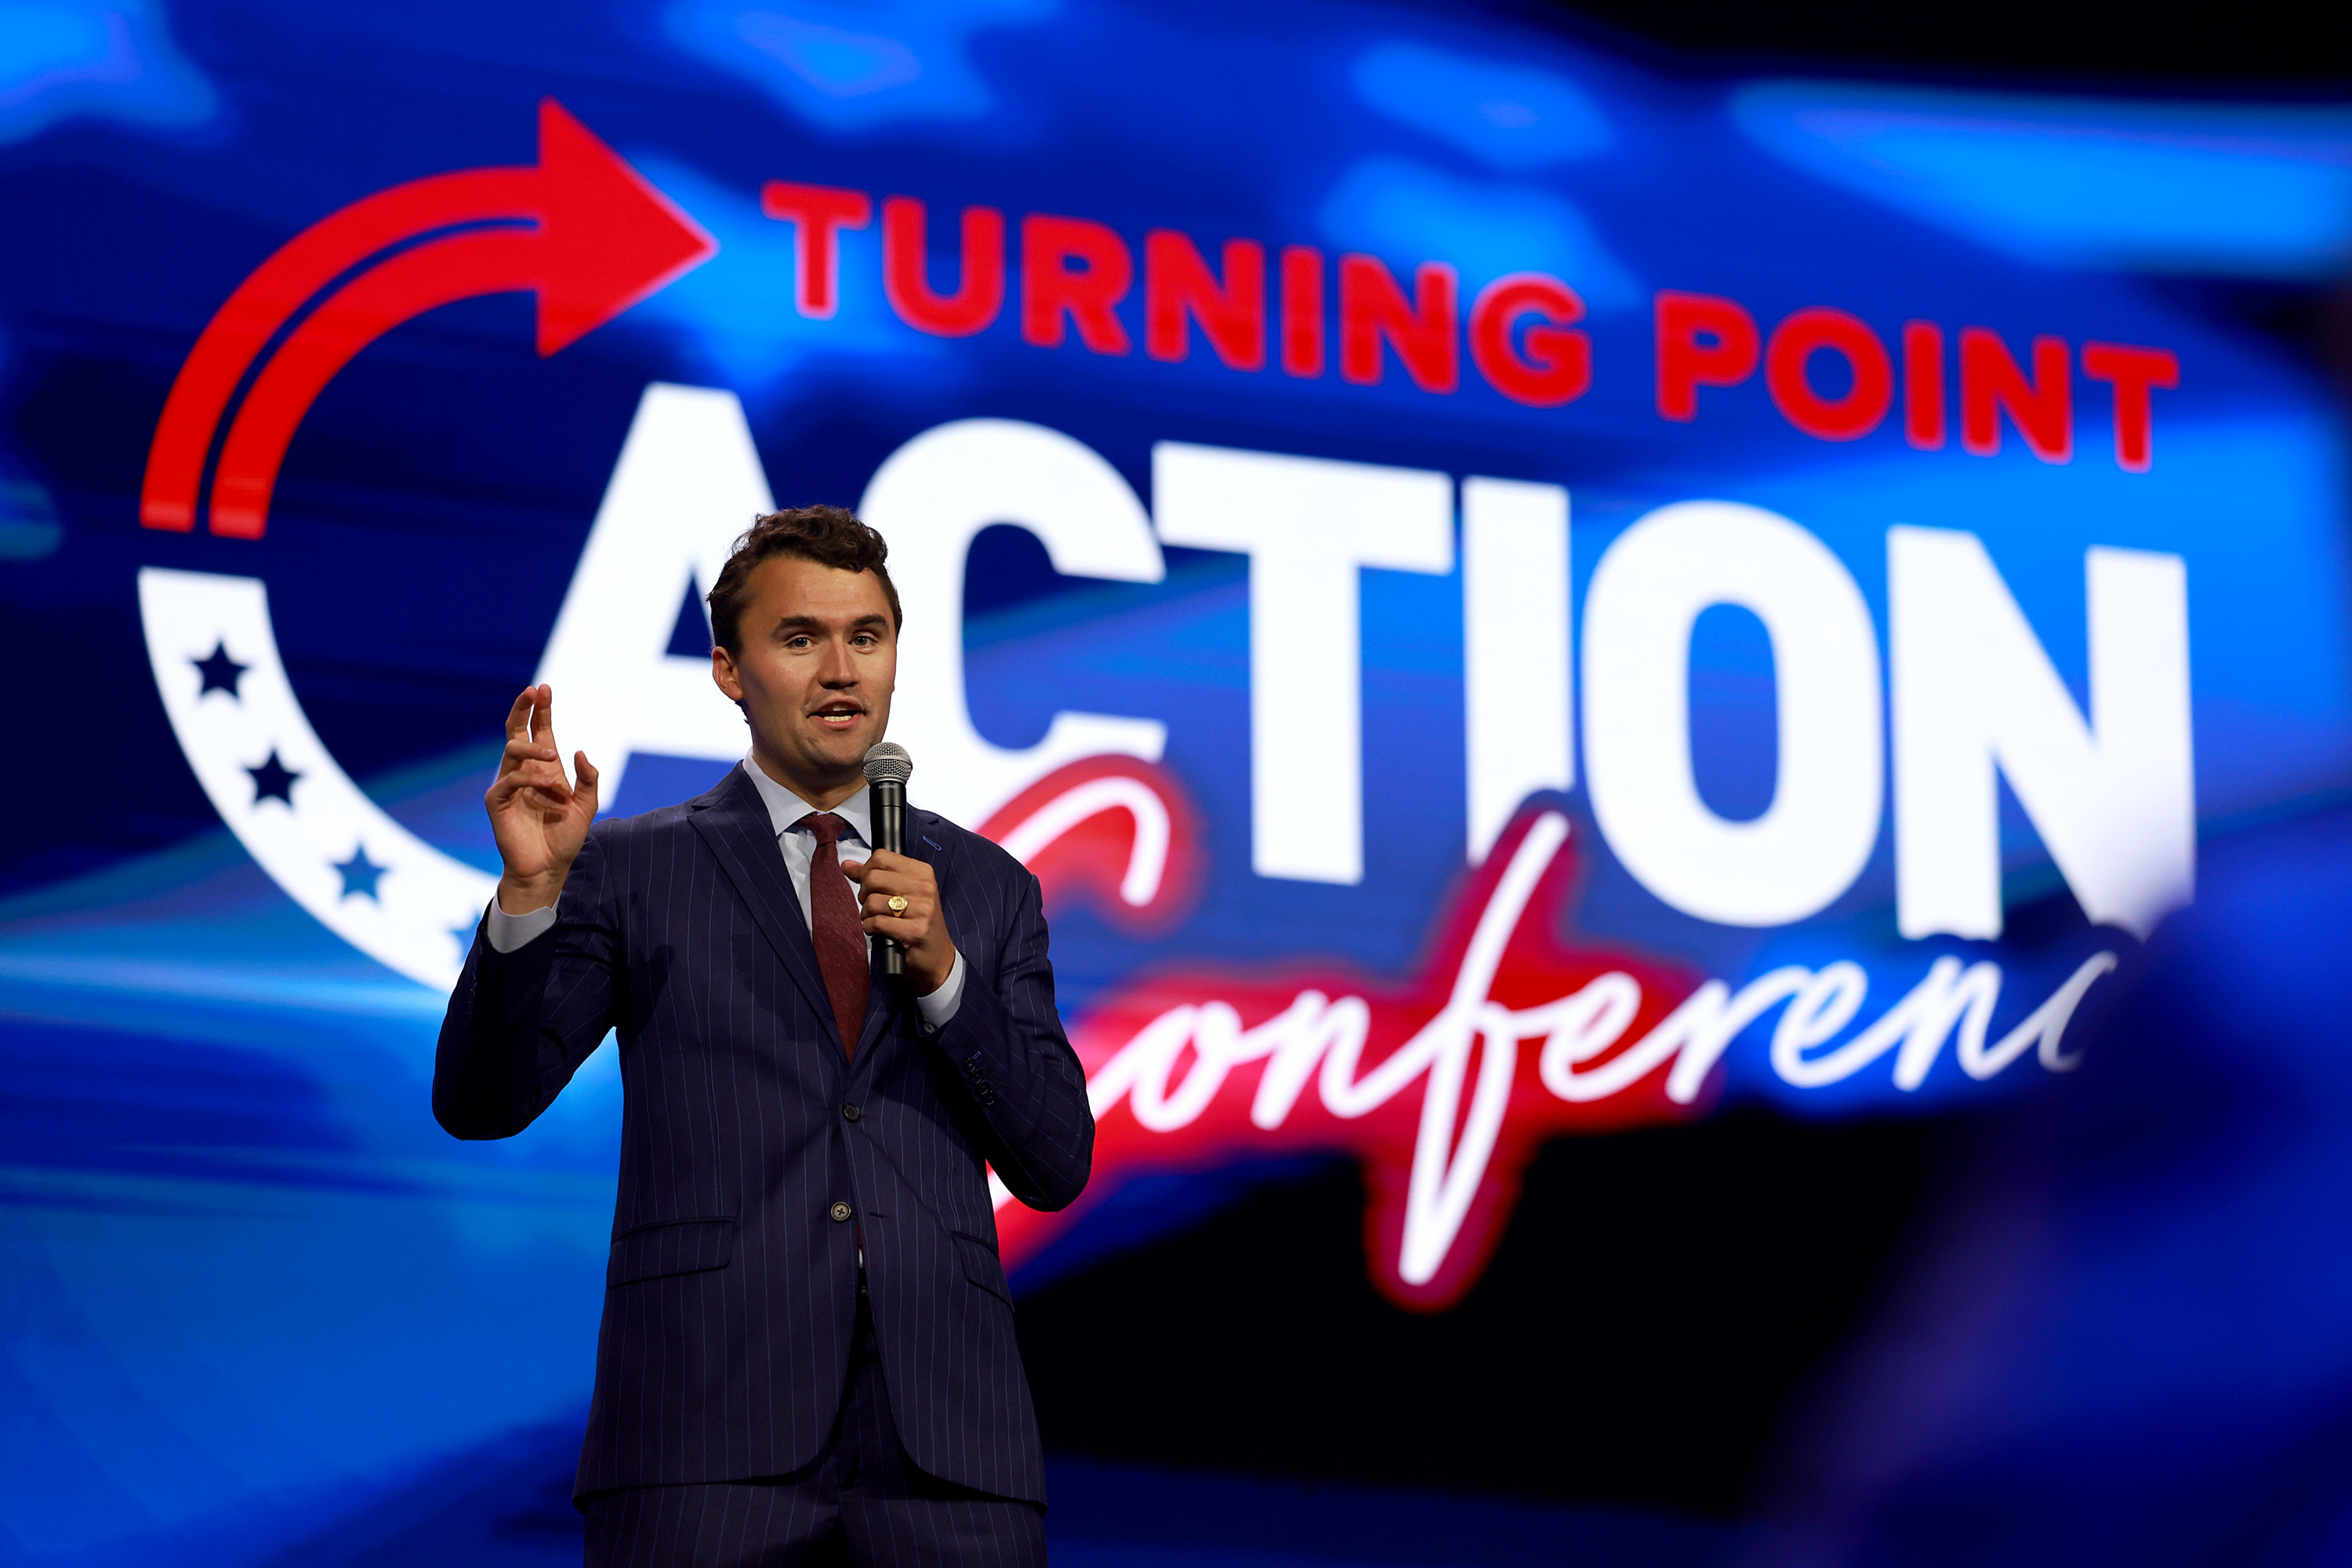 Charlie Kirk says TPUSA staffers crushed by ‘Hamas supporters’